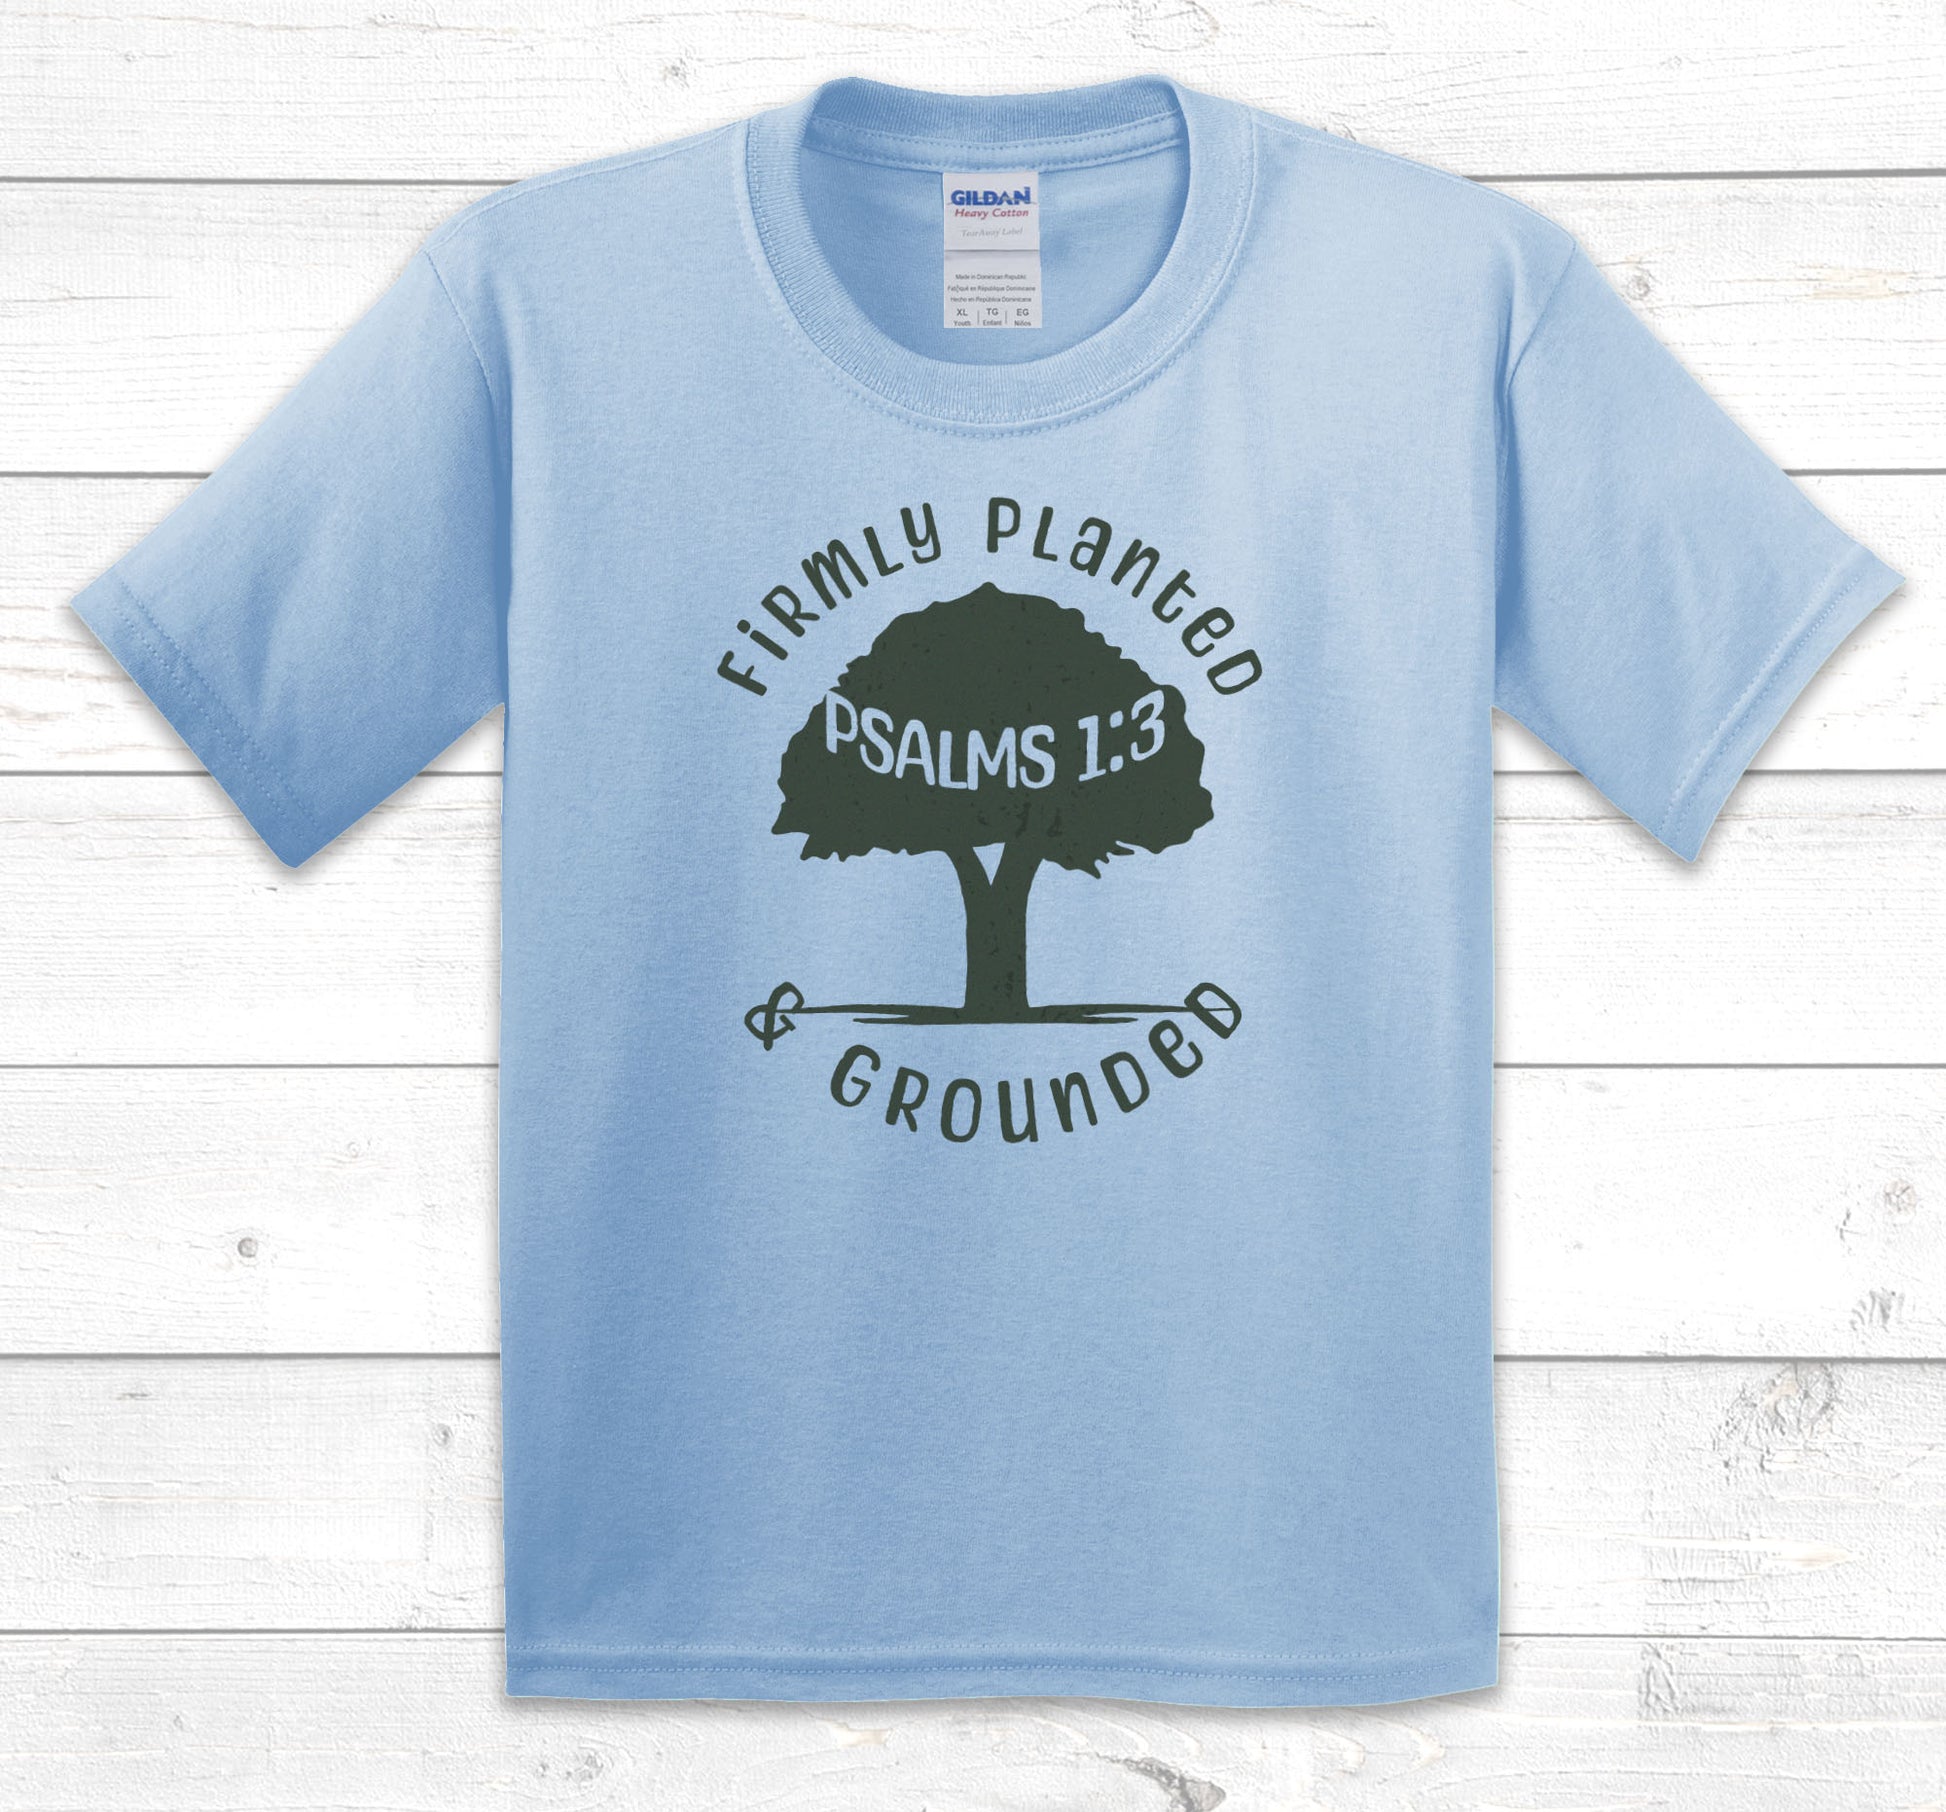 Firmly Planted kids t-shirt in Light Blue